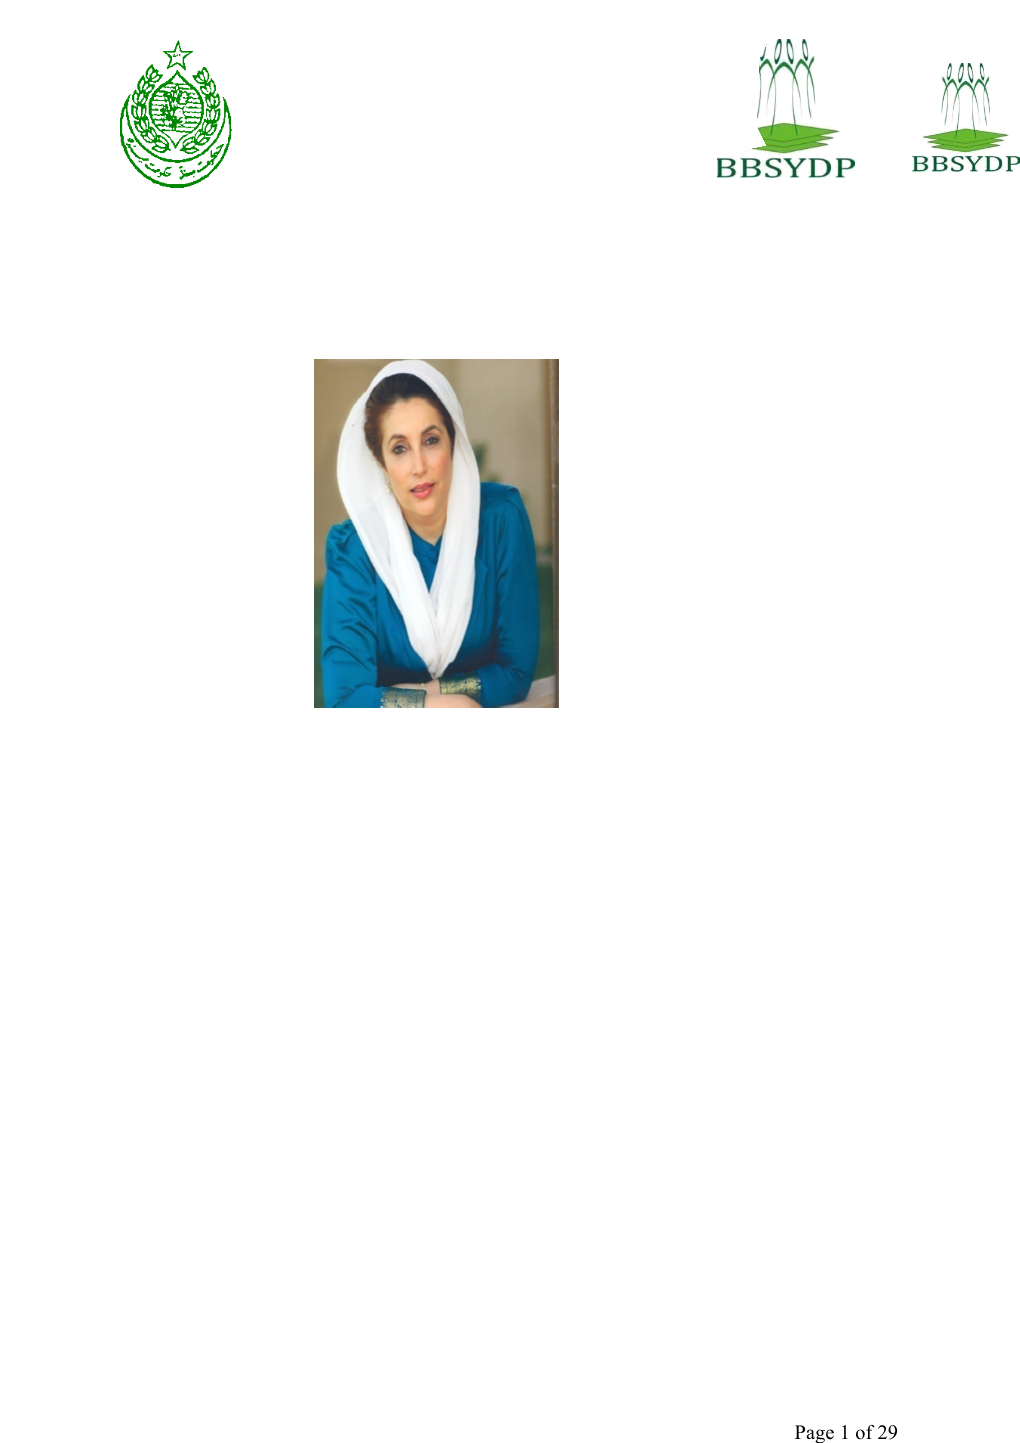 Request for Proposals for Third Party Monitoring & Evaluation of Benazir Bhutto Shaheed